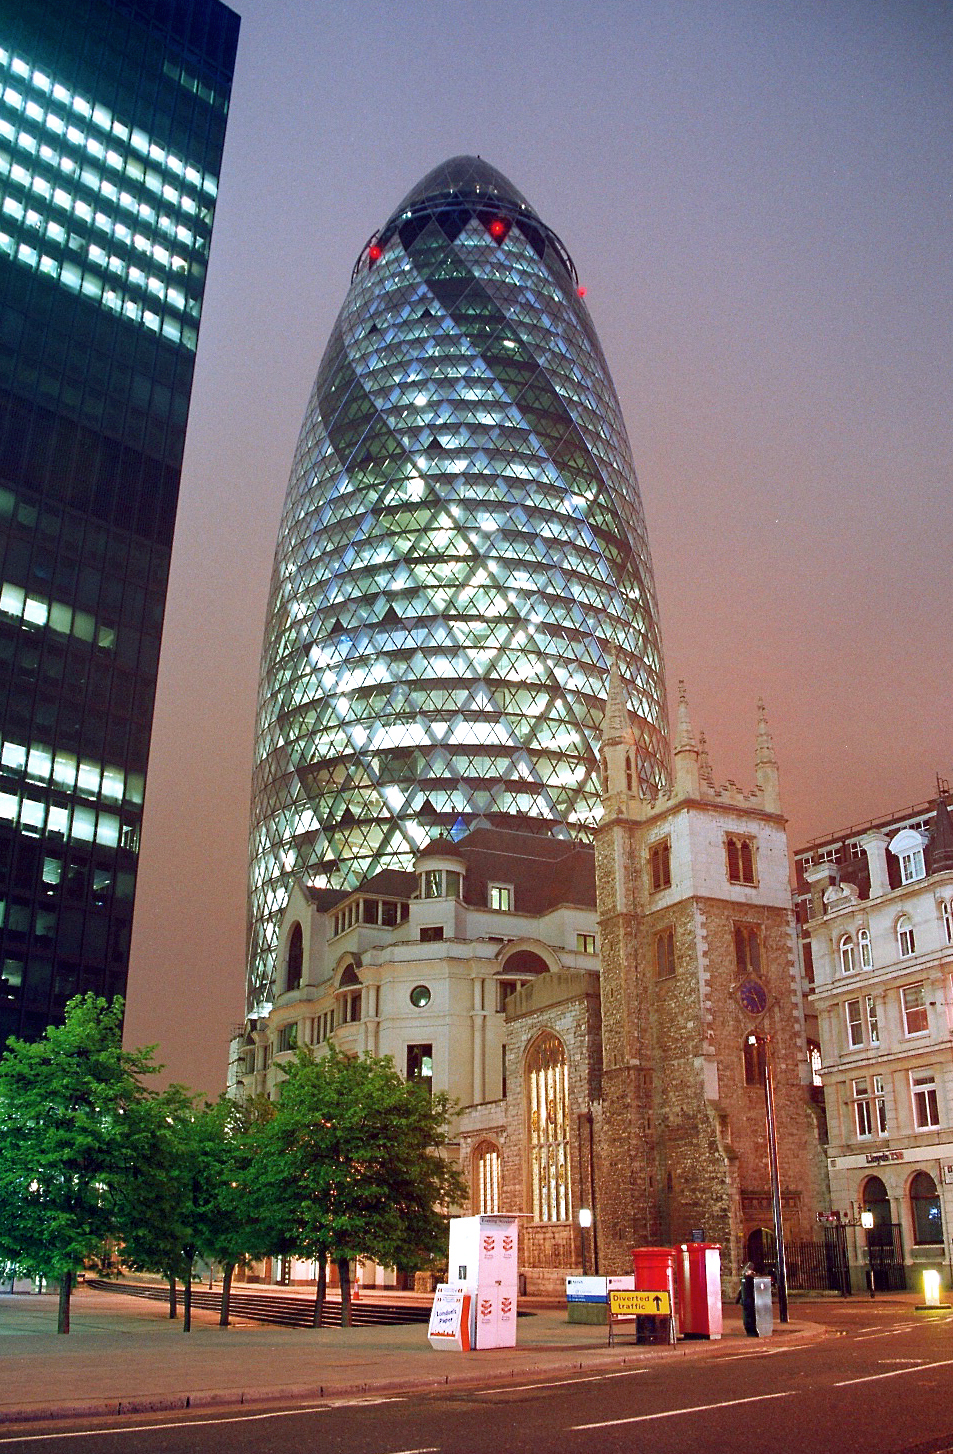 30 St Mary Axe, London - Night view from Leadenhall Street. © Mathias Beinling